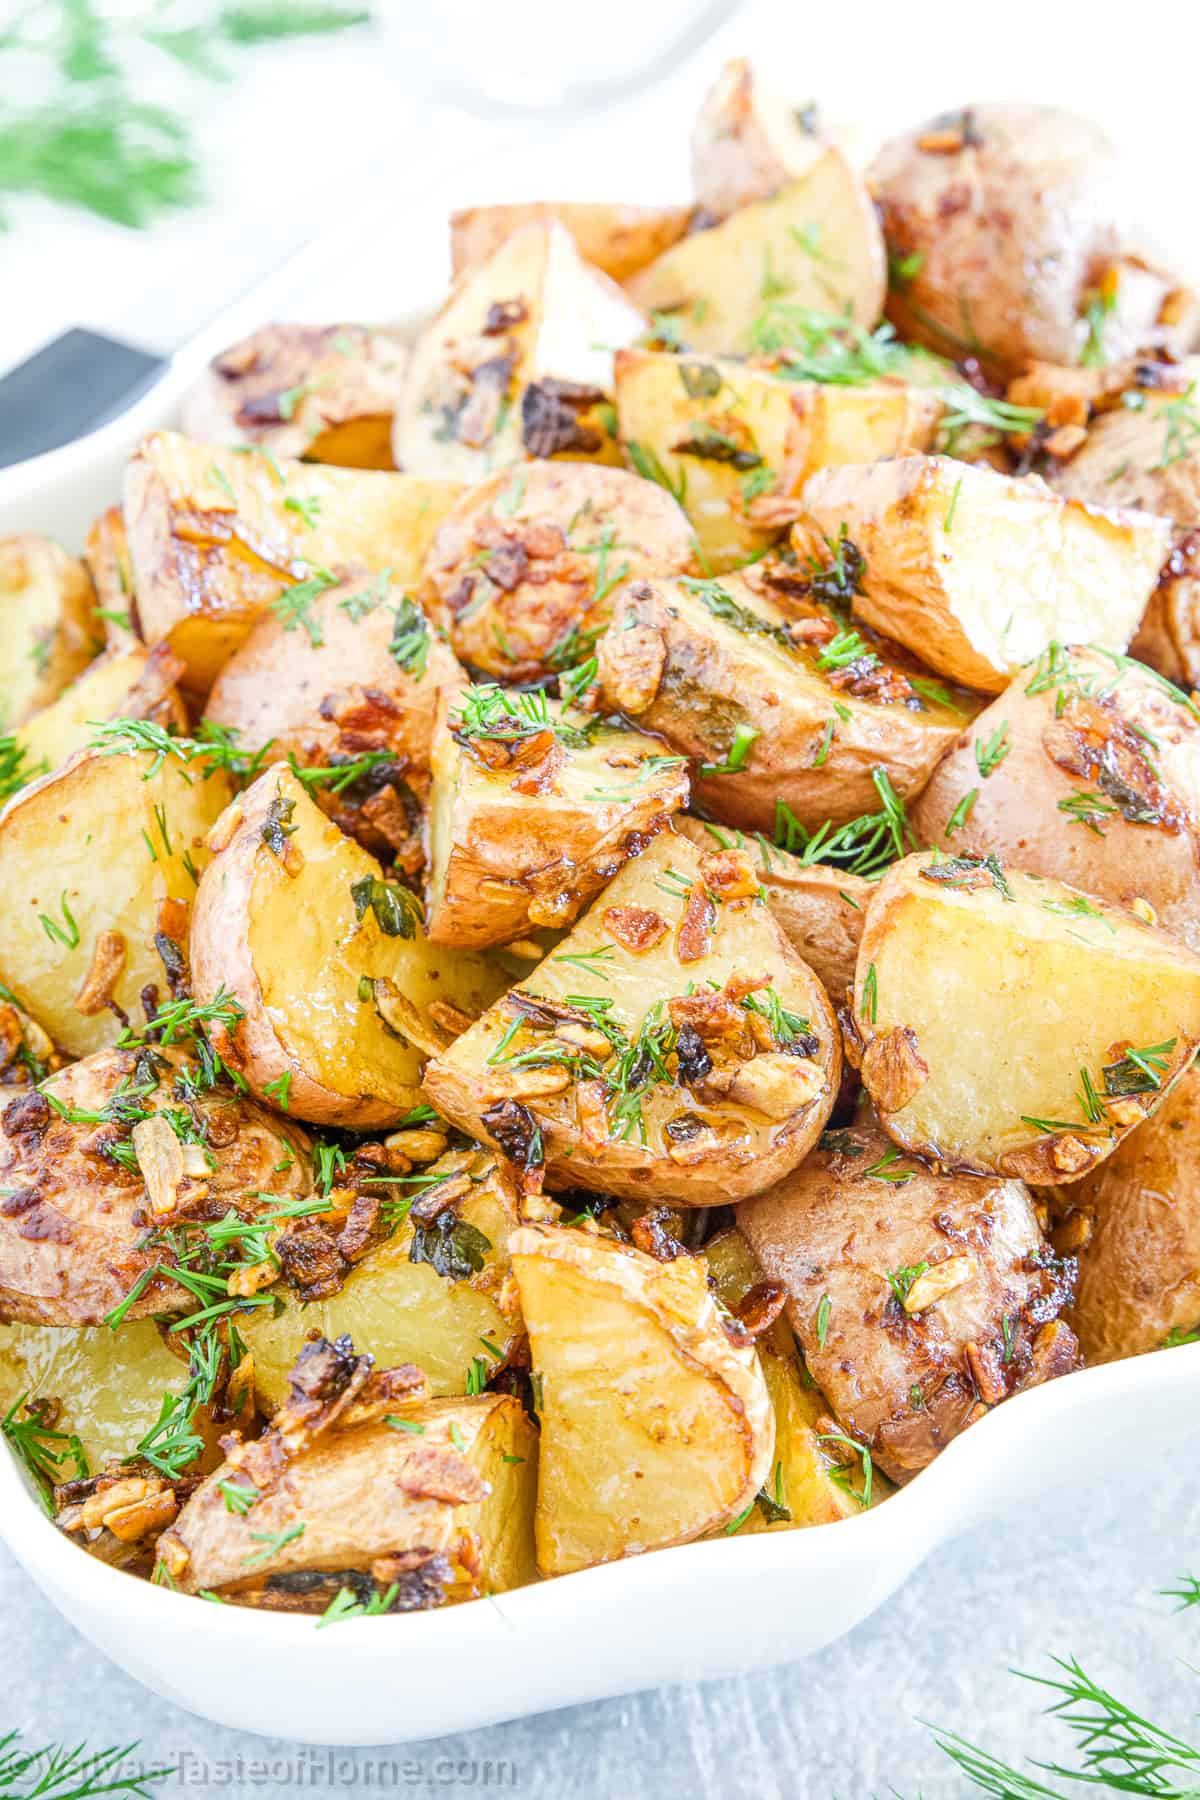 Onion roasted potatoes is a classic dish that's been given a flavor-packed twist.